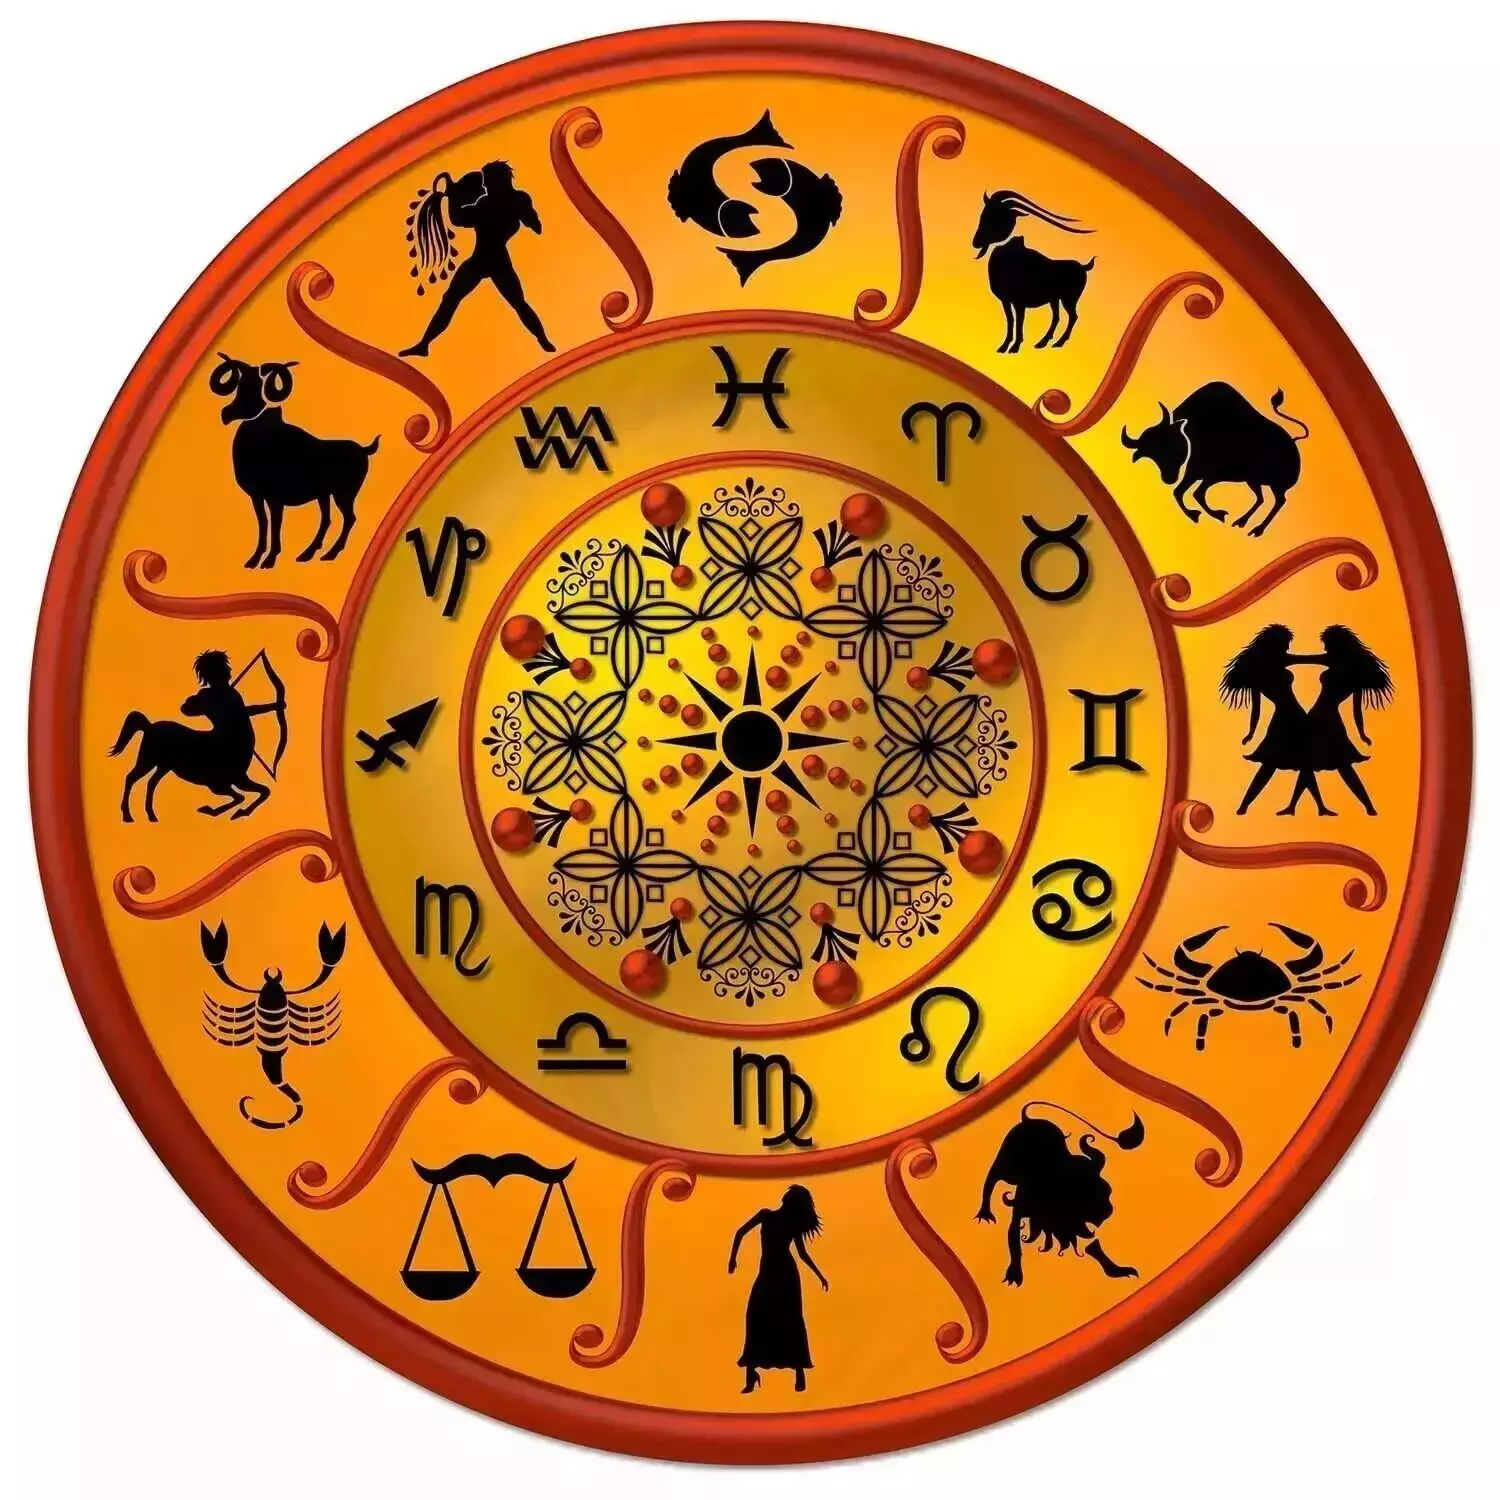 05 February  – Know your todays horoscope